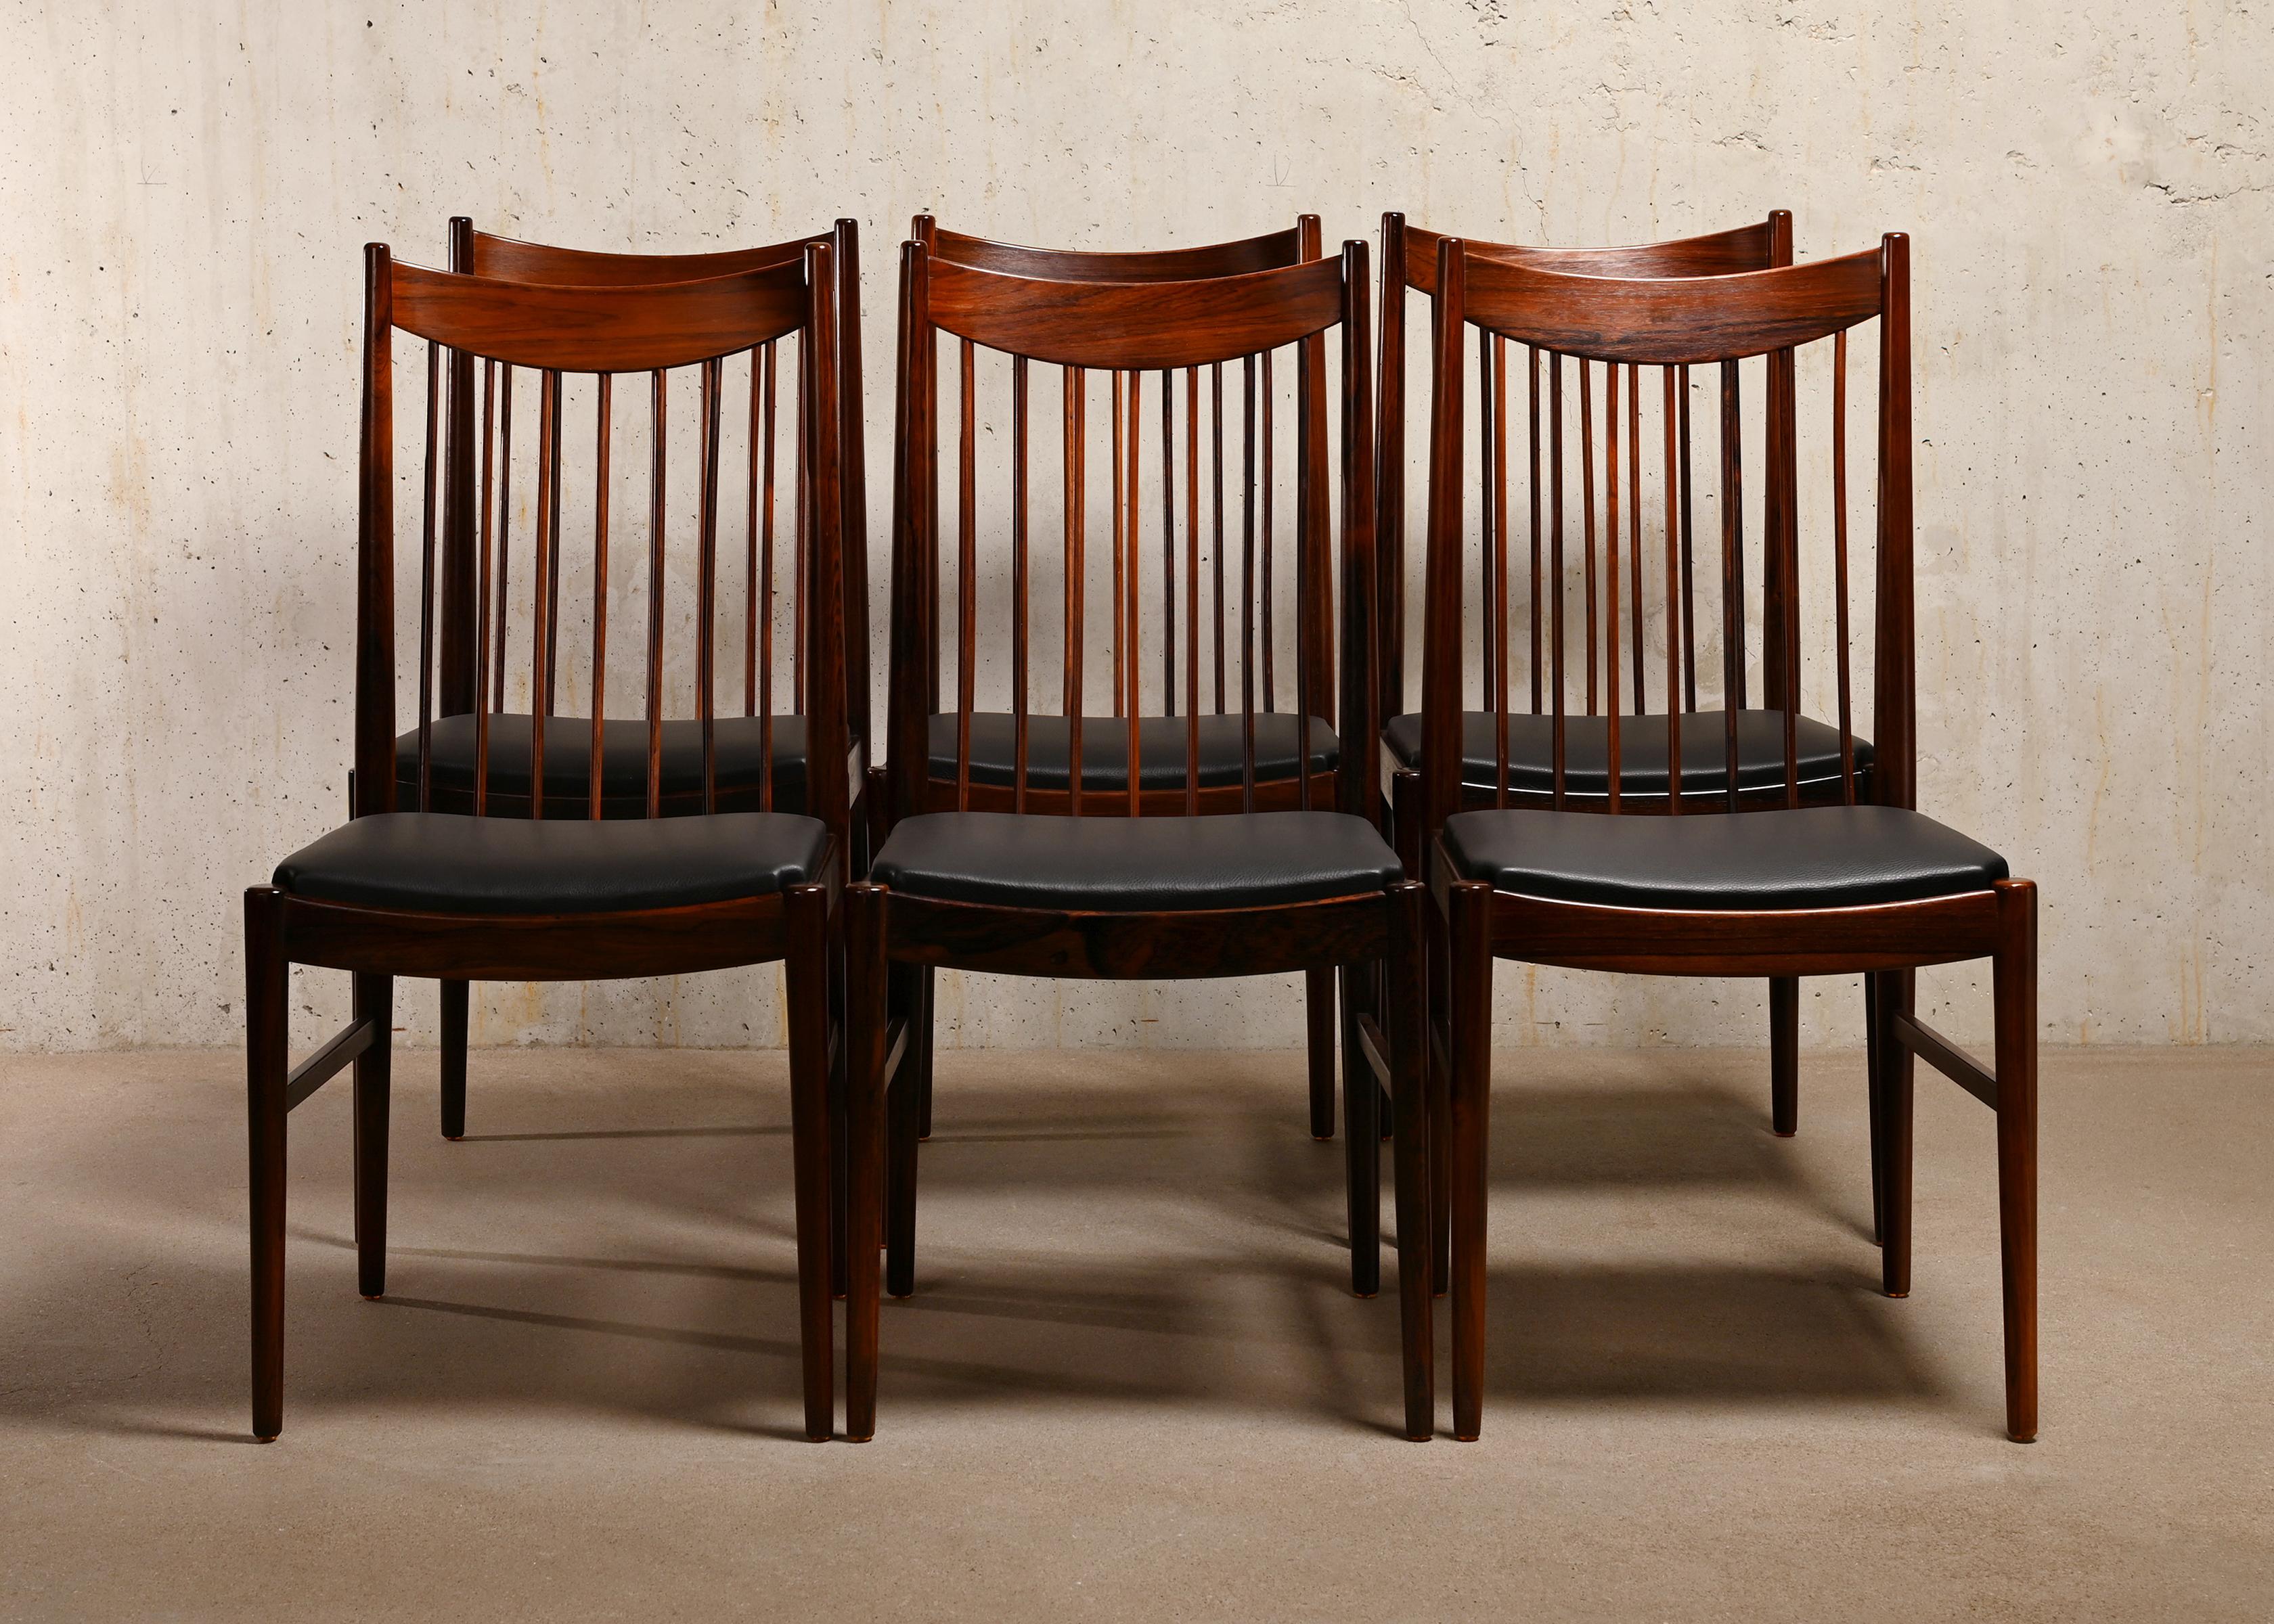 Elegant set of 6 dining chairs Model 422 designed by Arne Vodder for Sibast Furniture, Denmark. The design is sometimes also attributed to Helge Sibast. Solid Brazilian Rosewood frames in very good original condition with only slight wear and aging.